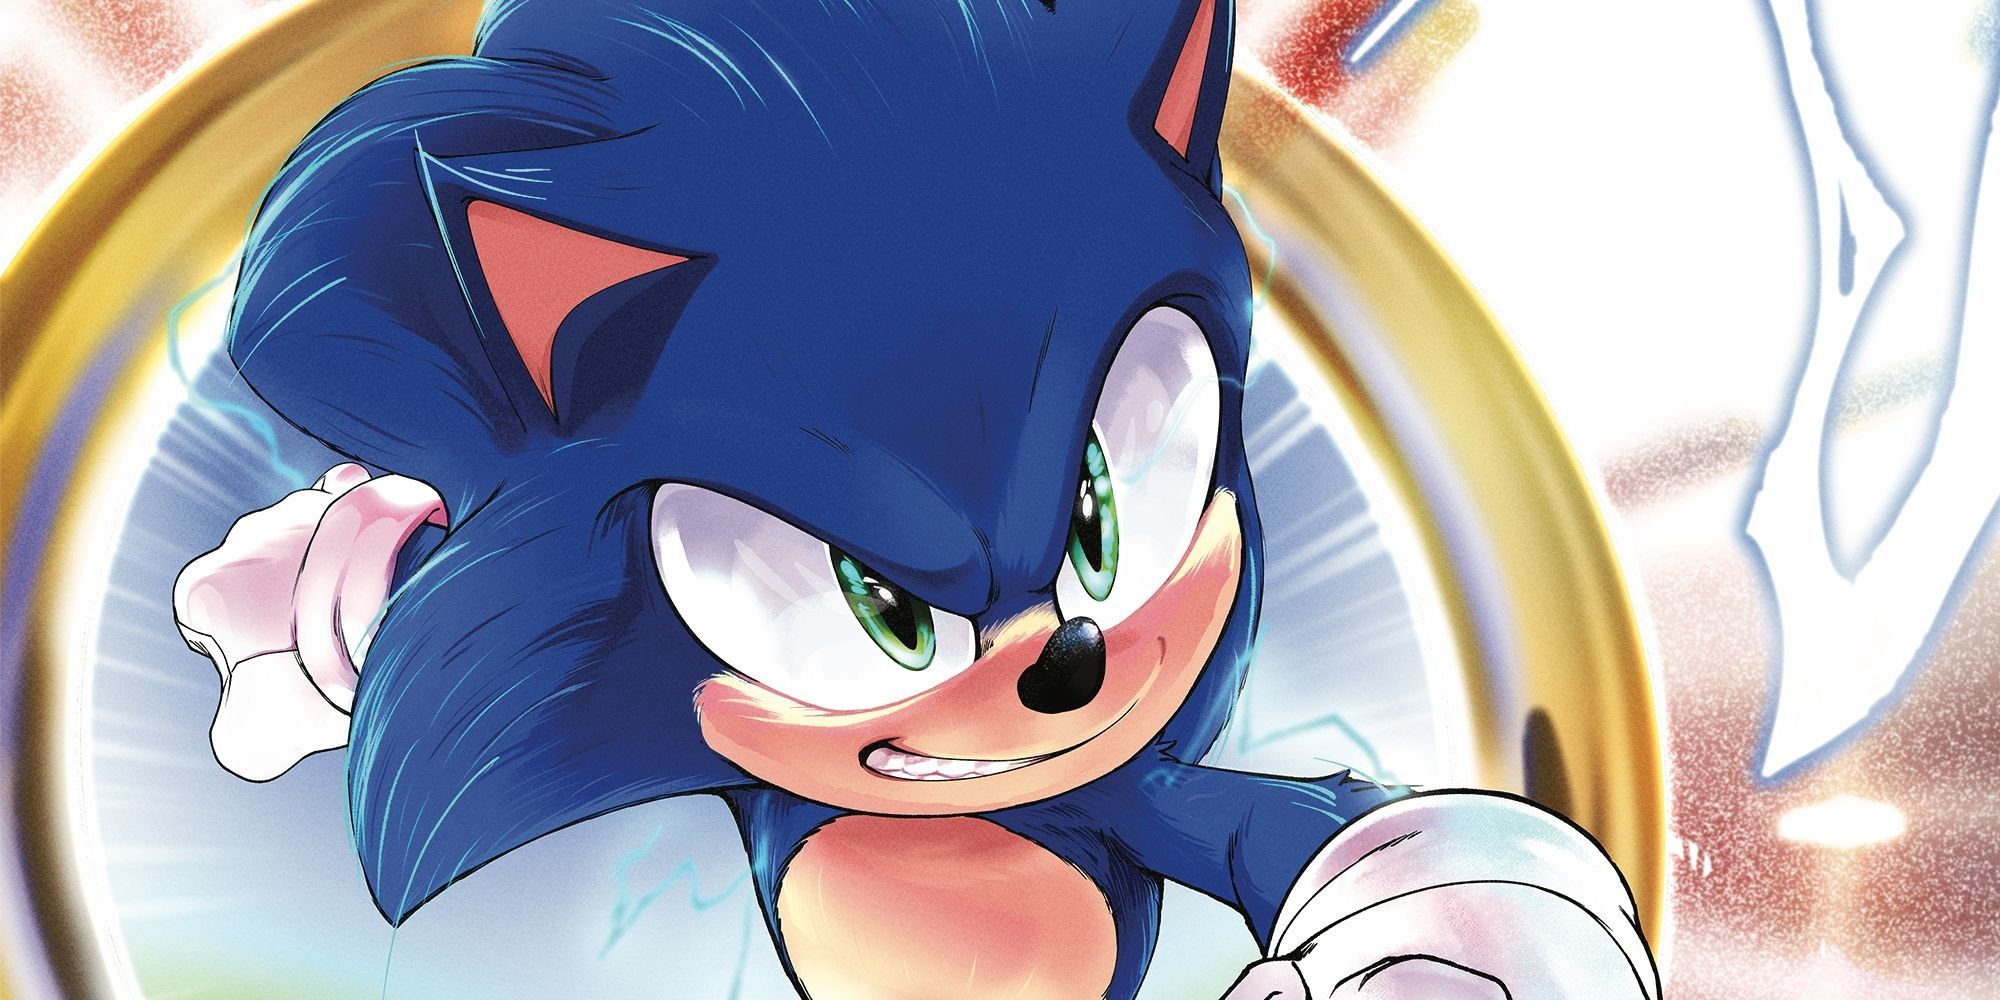 Speedin' Through — THE PREVIEW FOR IDW SONIC #10 IS OUT! It's SUPER